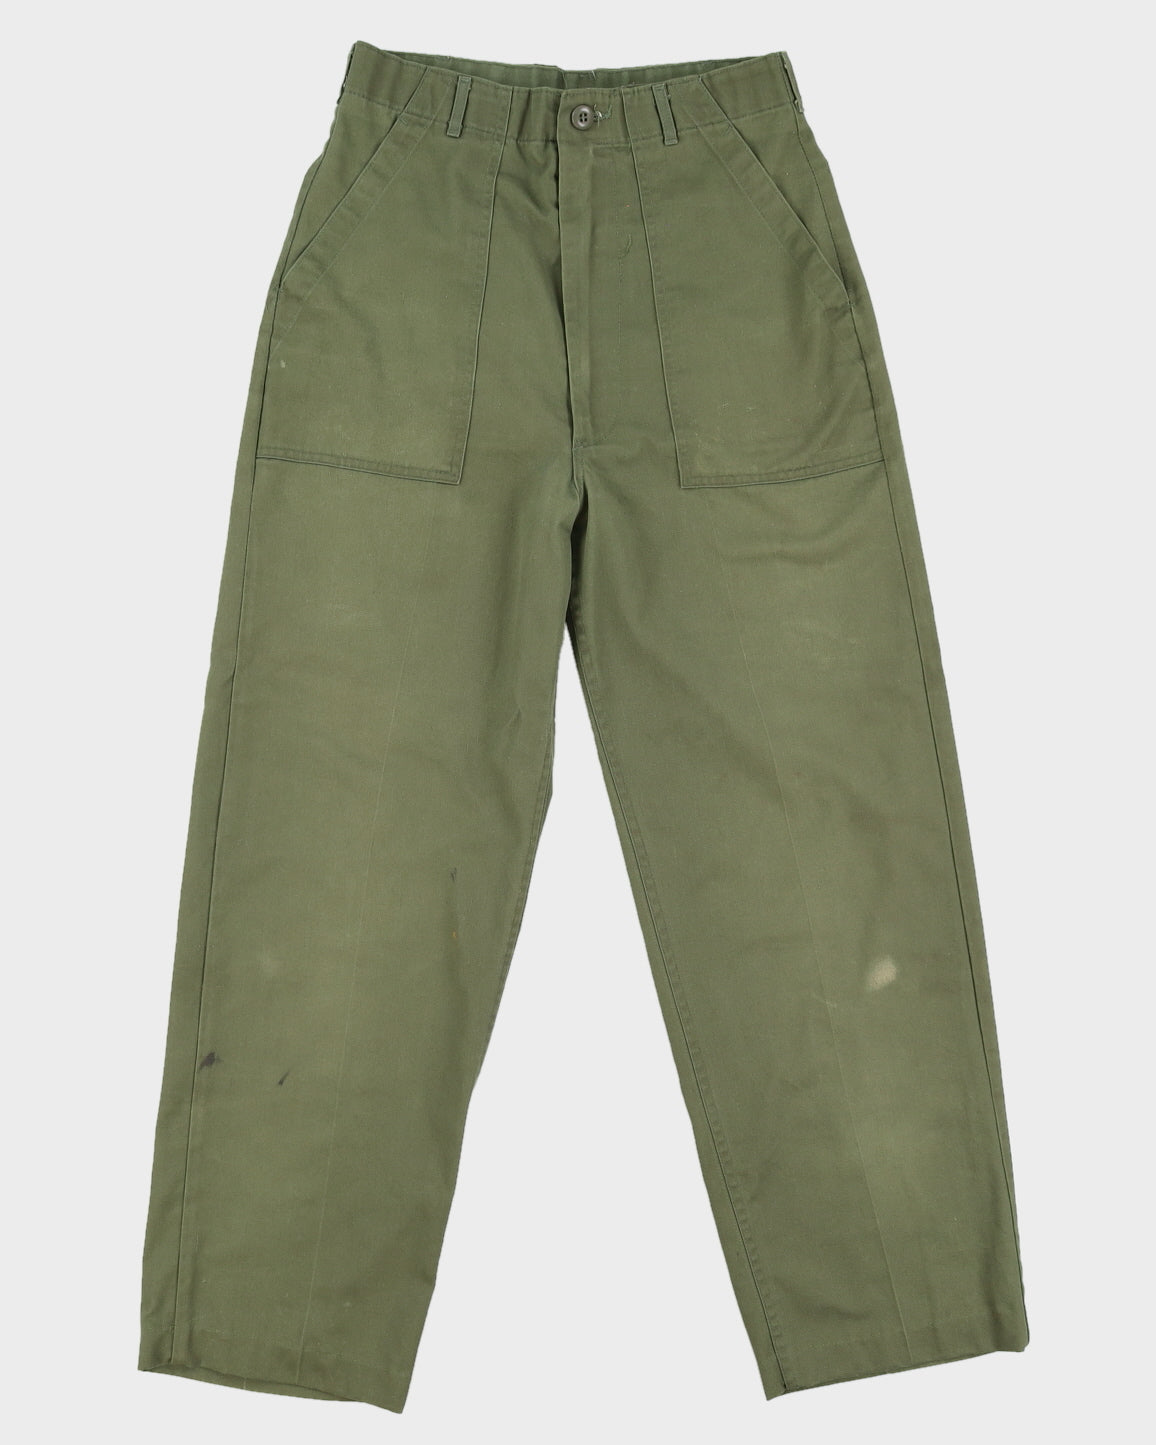 70s US Army OG-507 Trousers - 28x29